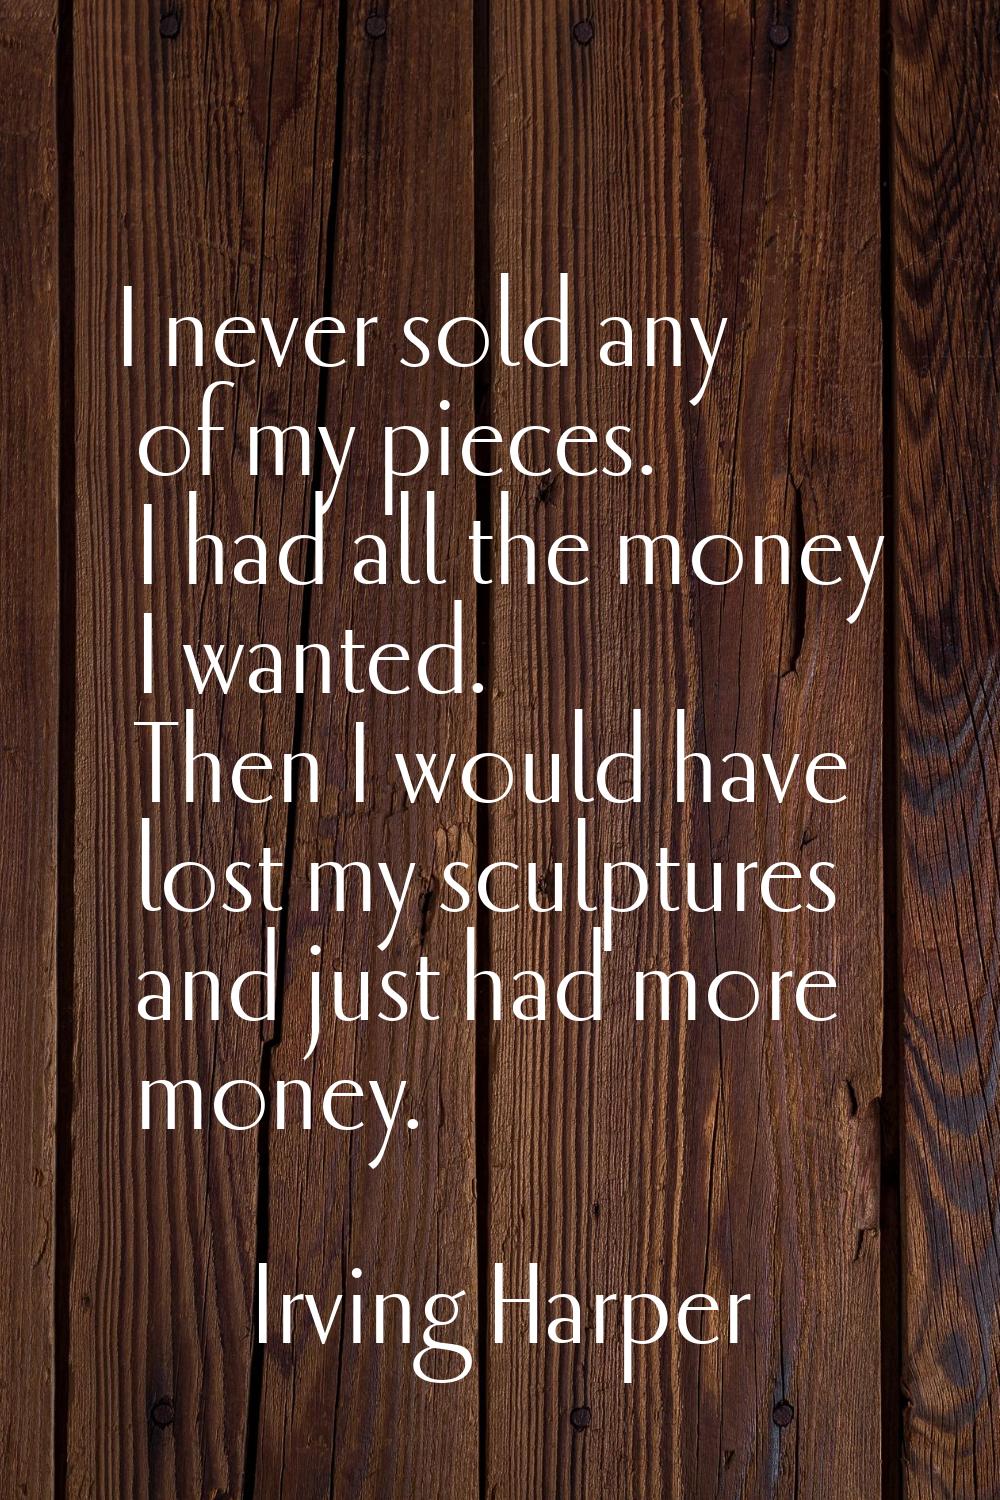 I never sold any of my pieces. I had all the money I wanted. Then I would have lost my sculptures a